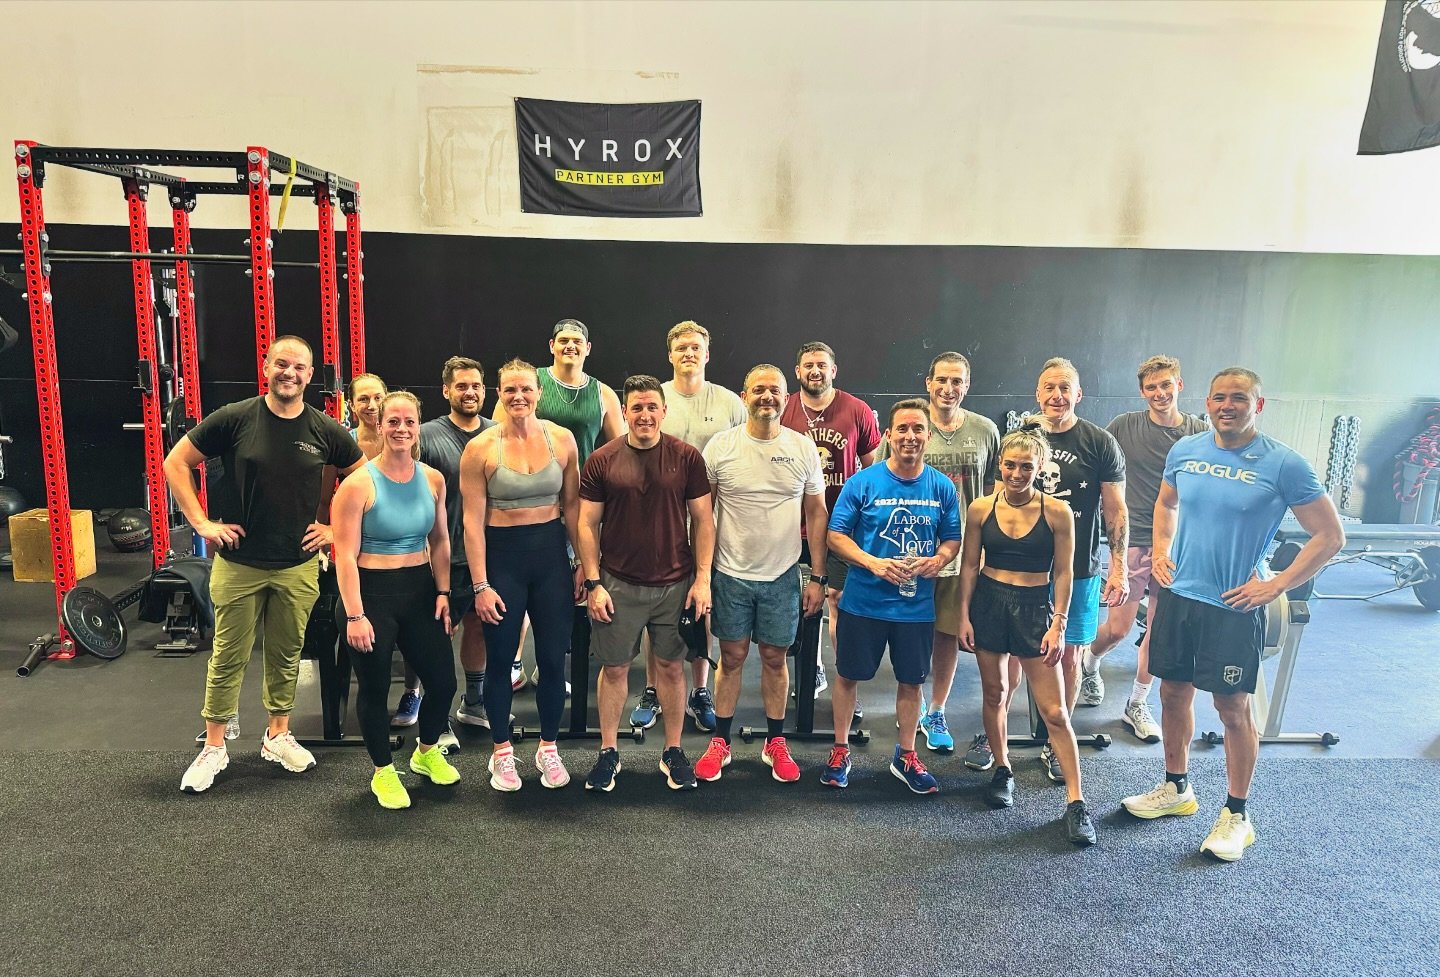 🙌Our Saturday morning HYROX crew minus @dcilea 

🗓️Join us this Saturday May 4th at 10AM for a HYROX Level Set to prepare for the upcoming HYROX NYC and Level Set your training intensity 1 MONTH OUT! 🗣️
&bull;Free for ARCH Training members. $25 fo